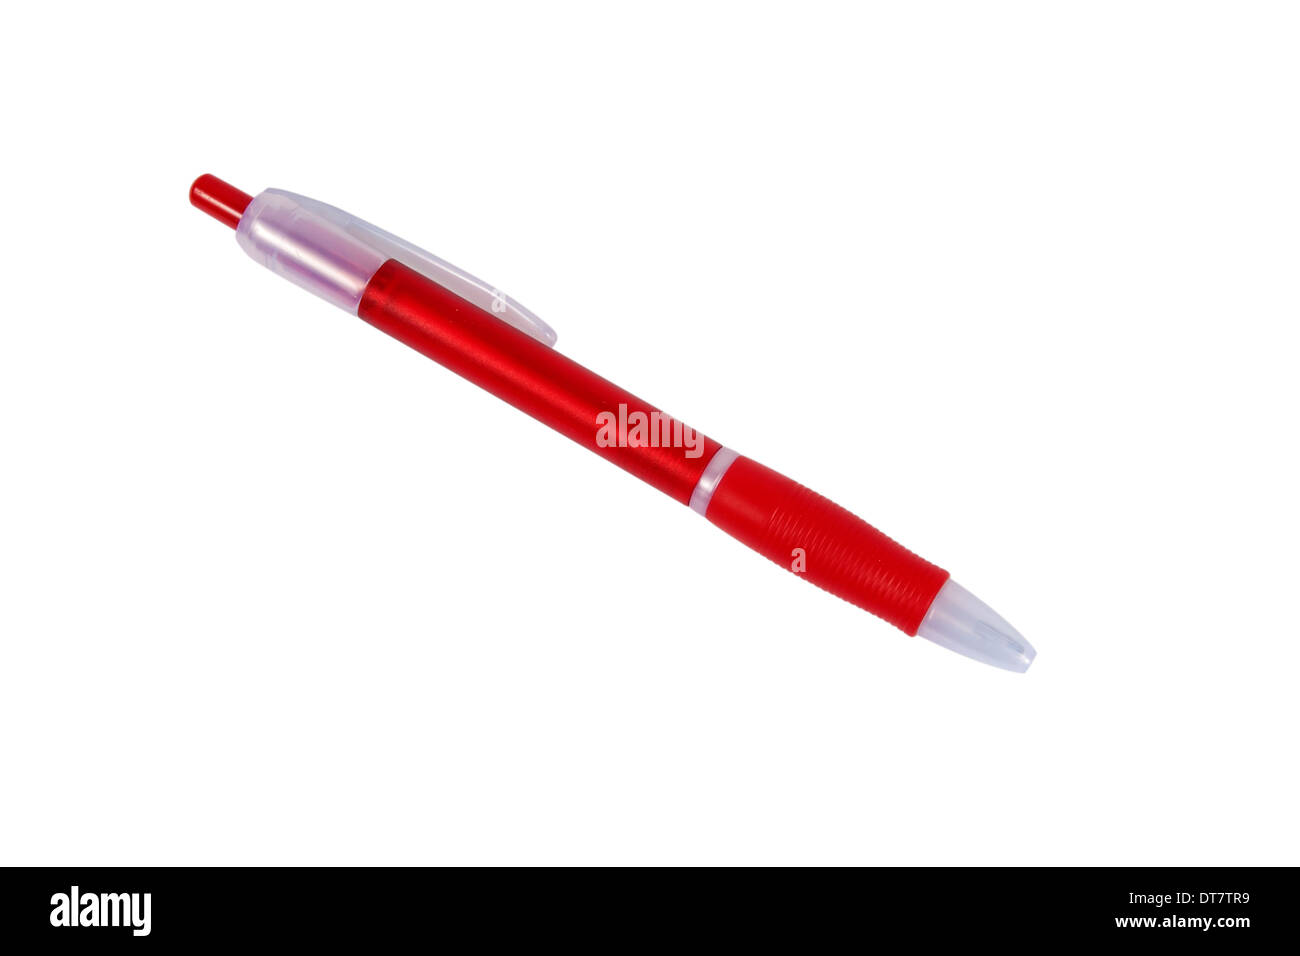 Single red ball pen isolated on white background Stock Photo